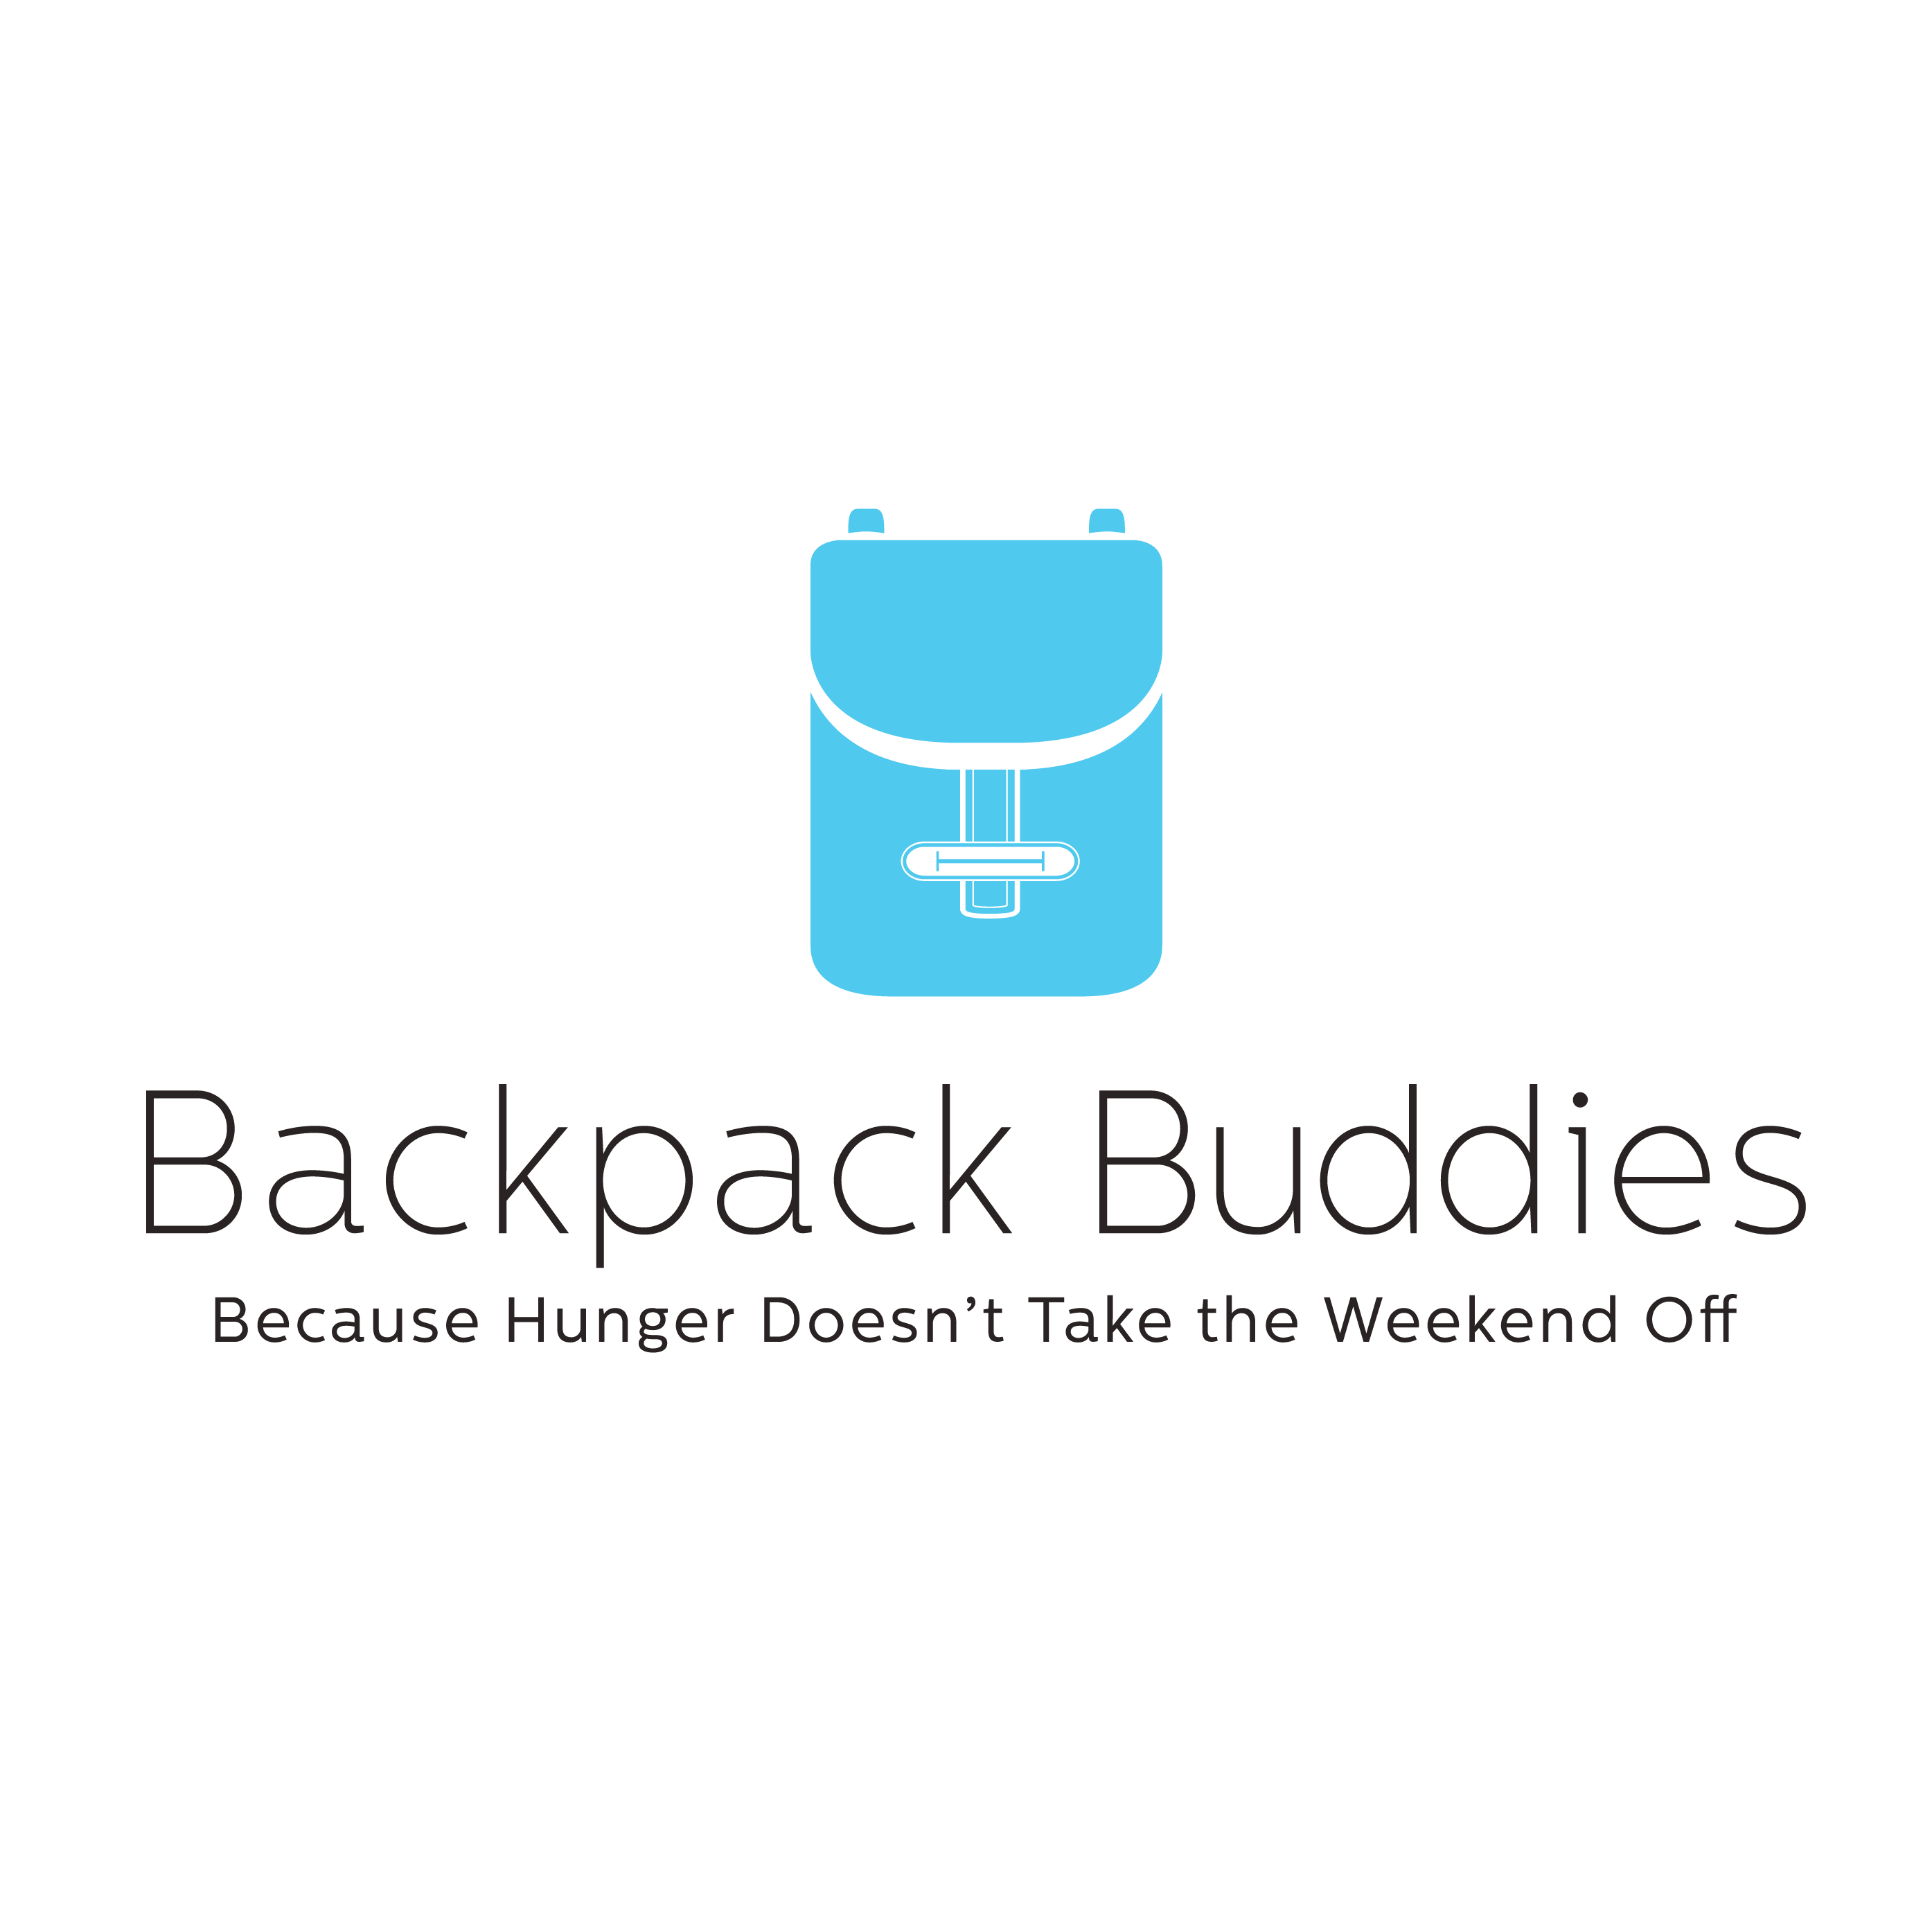 Join us in Supporting Backpack Buddies